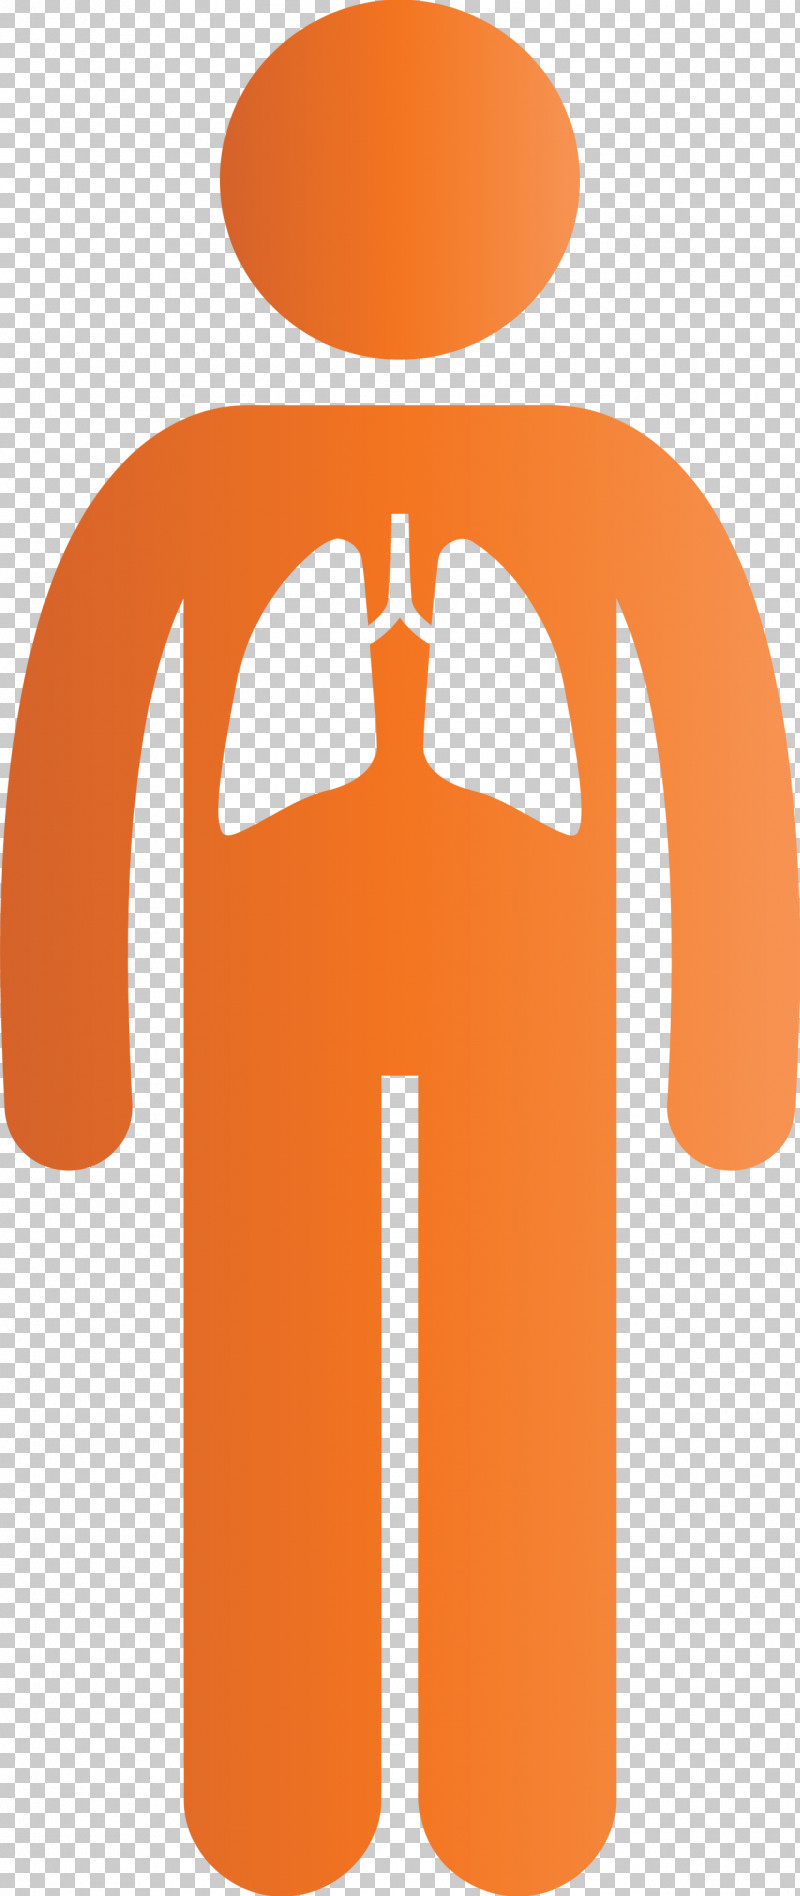 Lungs People Corona Virus Disease PNG, Clipart, Active Shirt, Corona Virus Disease, Jersey, Lungs, Orange Free PNG Download